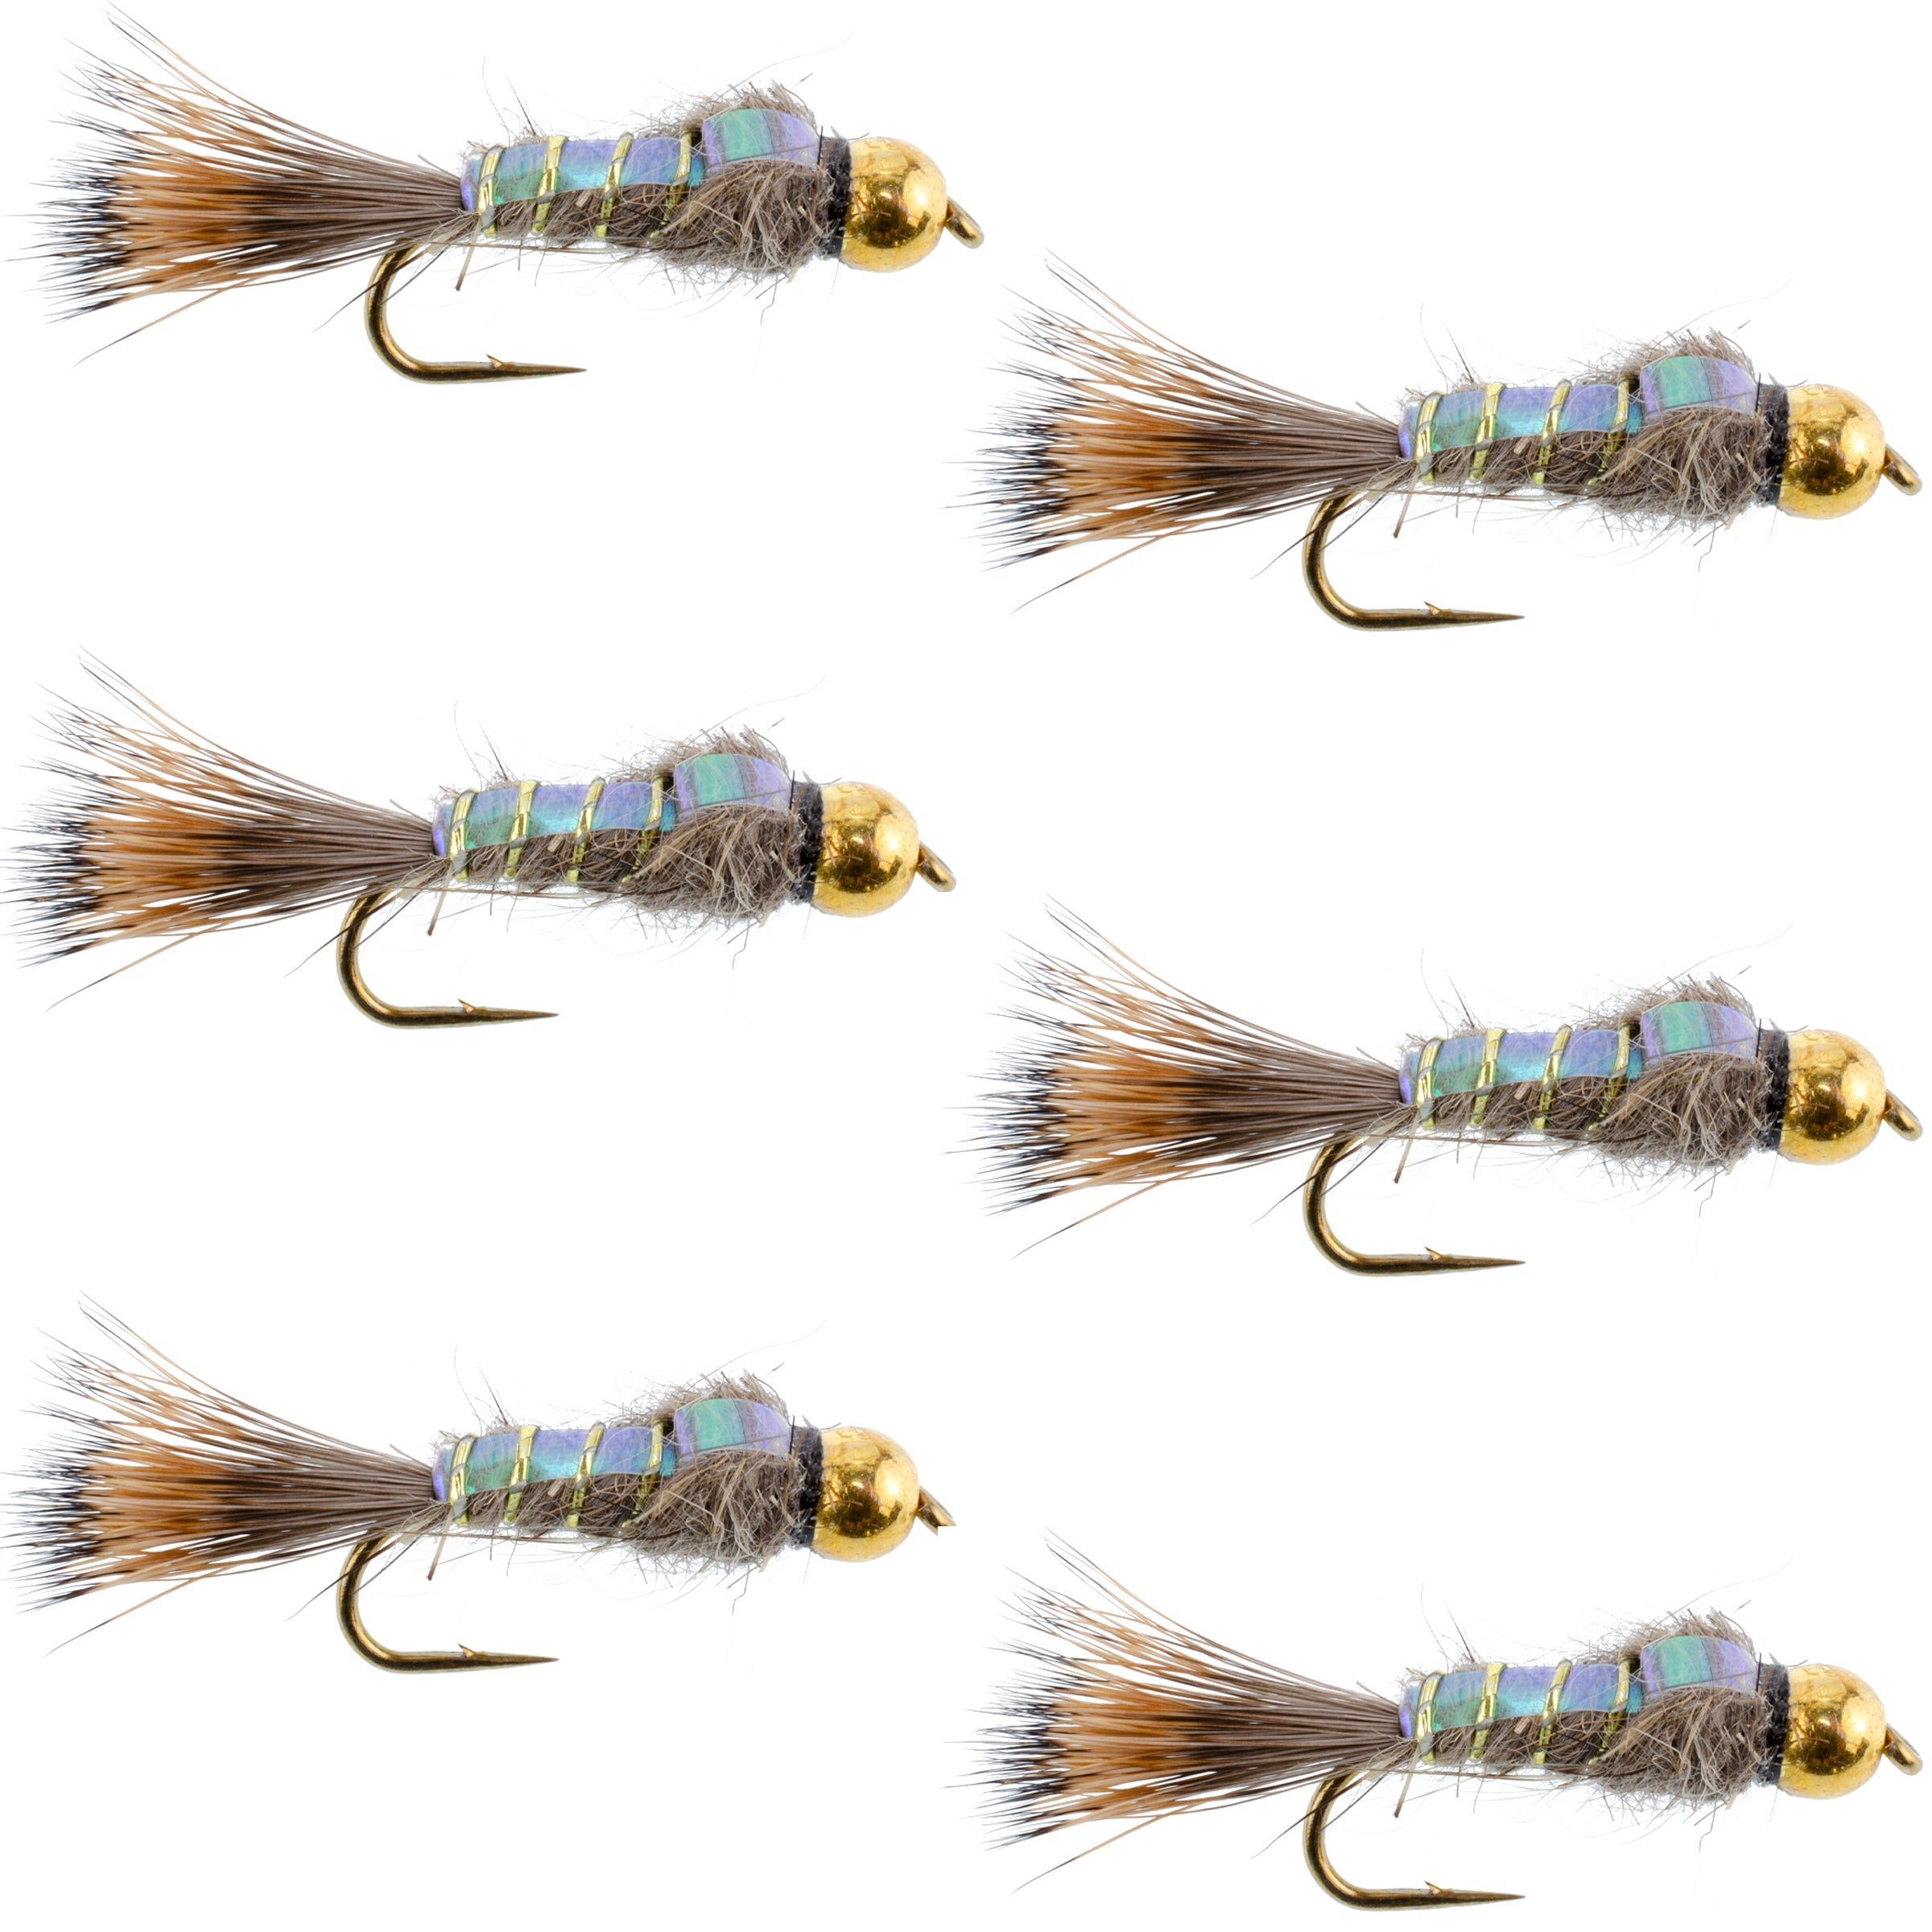 Bead Head Nymph Fly Fishing Flies - Flashback Gold Ribbed Hare's Ear Trout Fly - Nymph Wet Fly - 6 Flies Hook Size 12